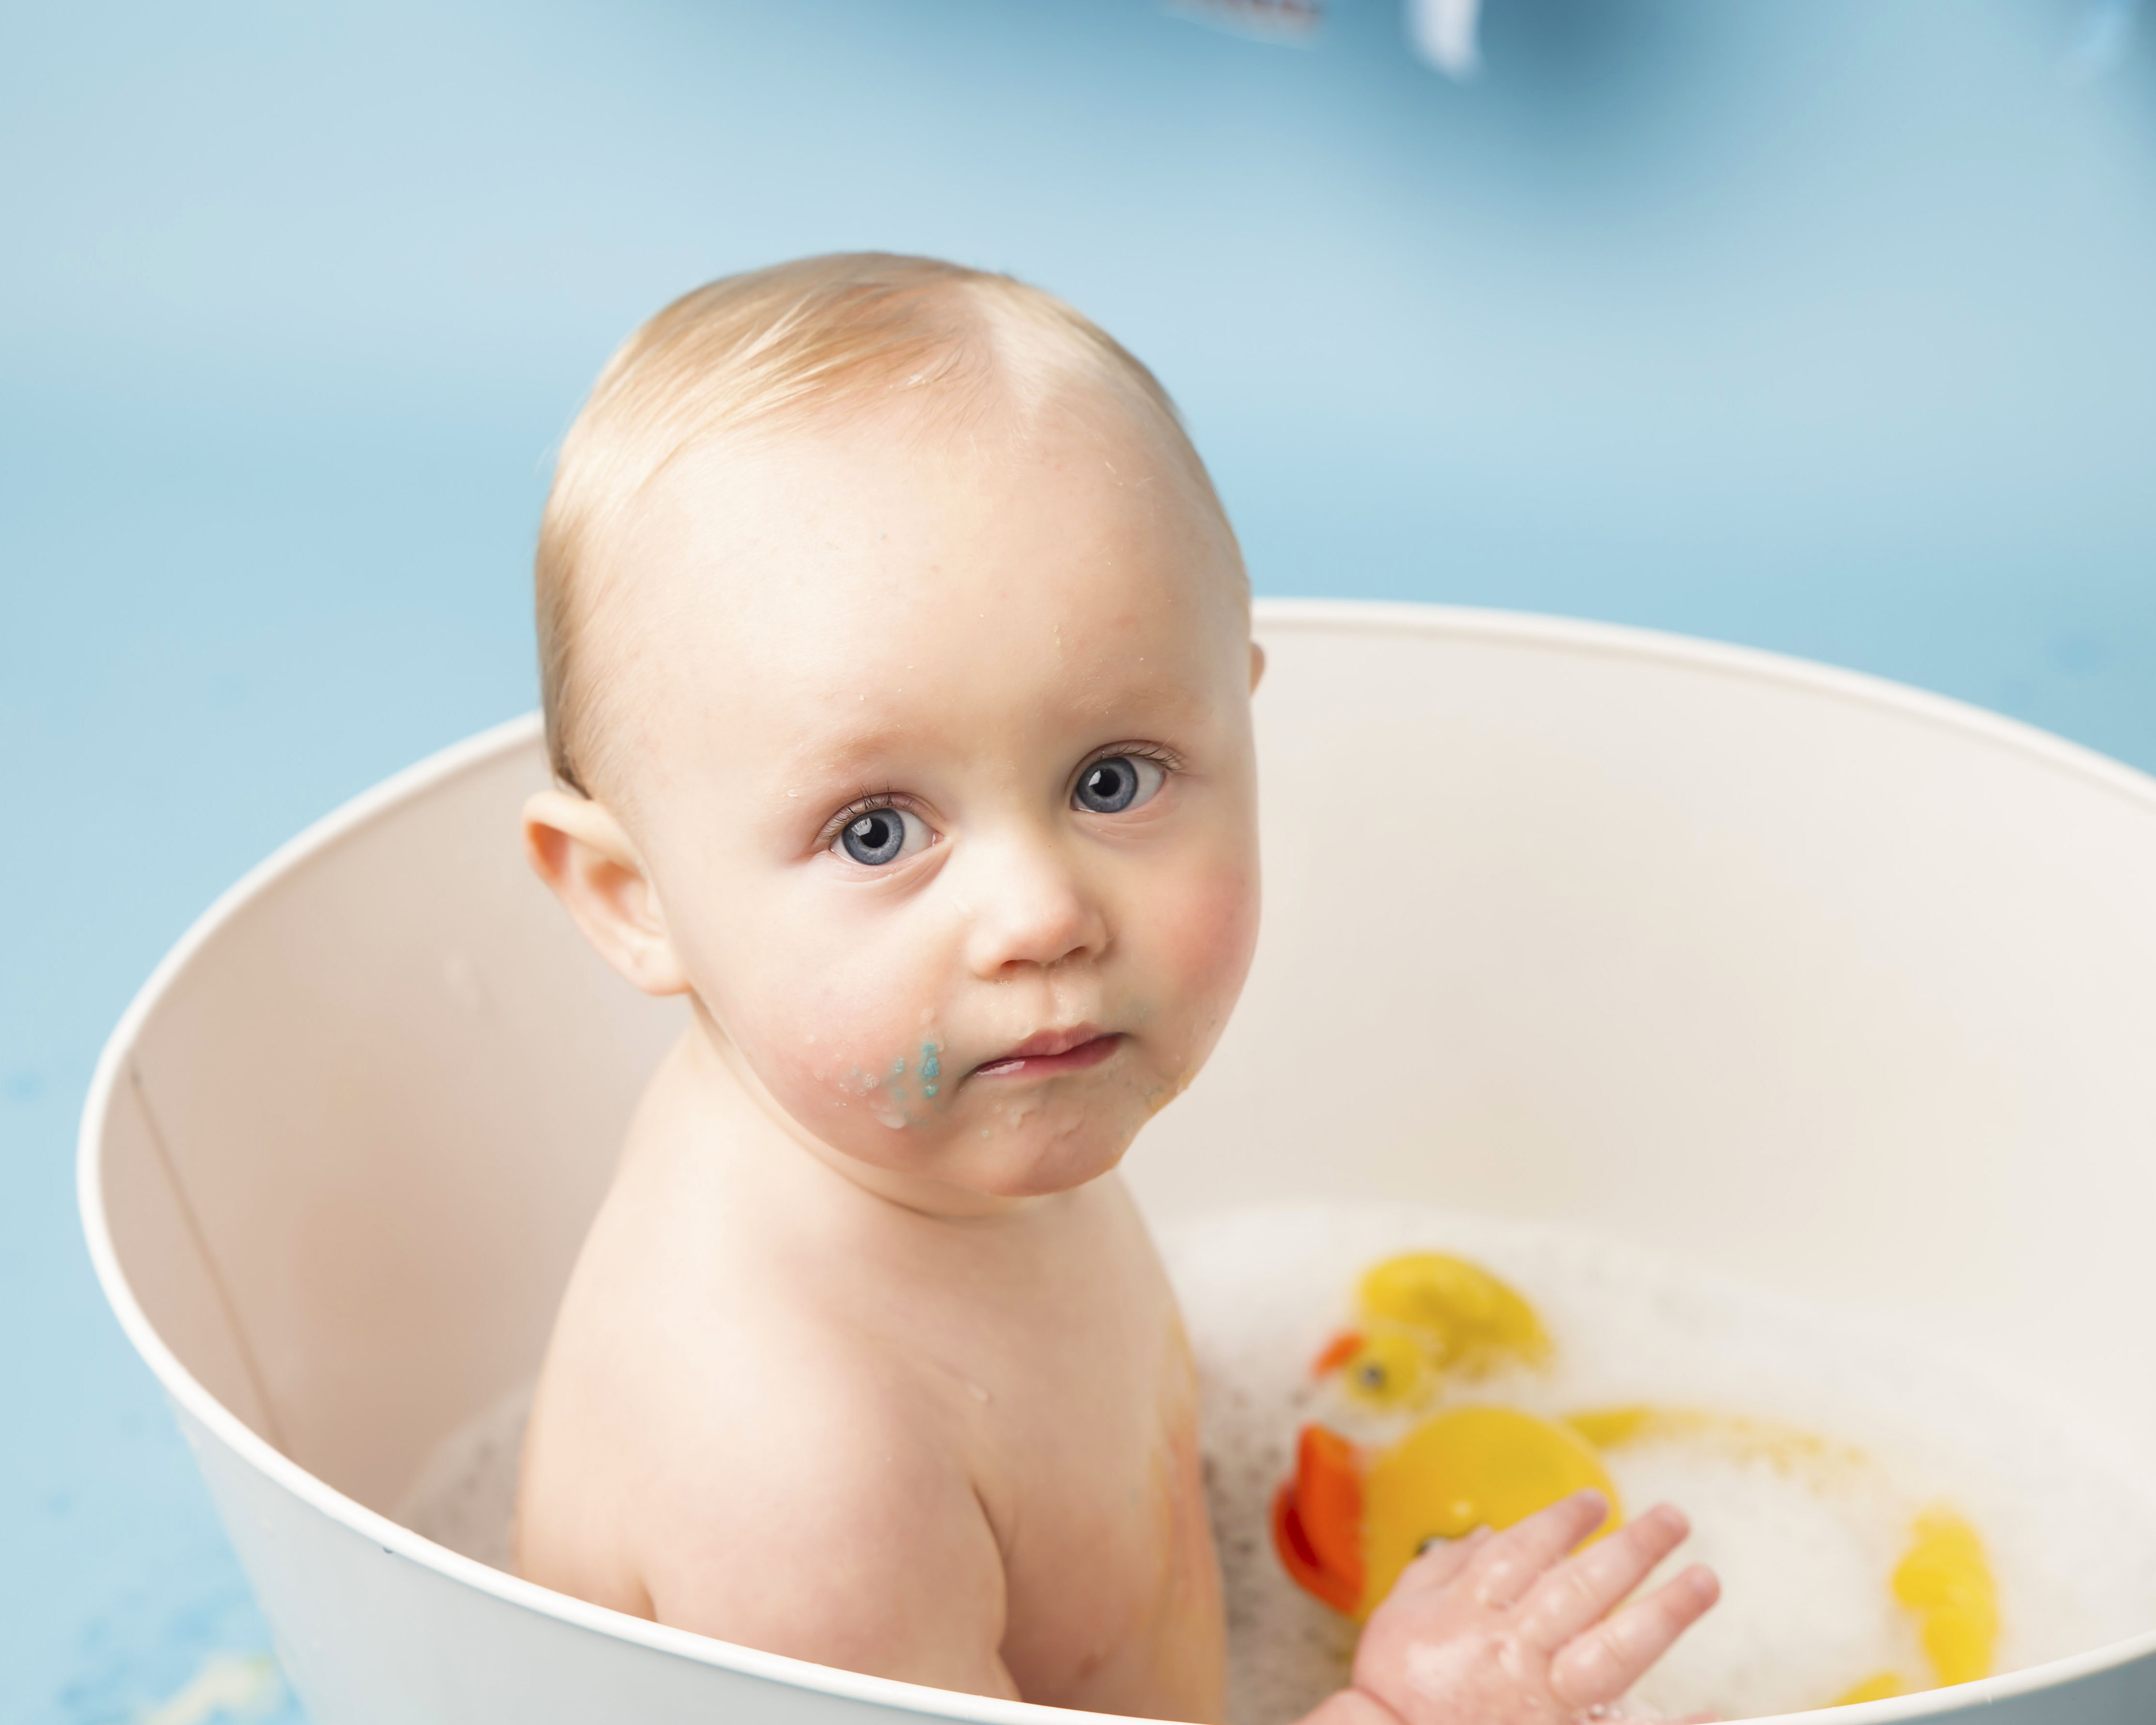 Baby Boy in a white tin bath with a yellow rubber duck - Wirral based Photographer